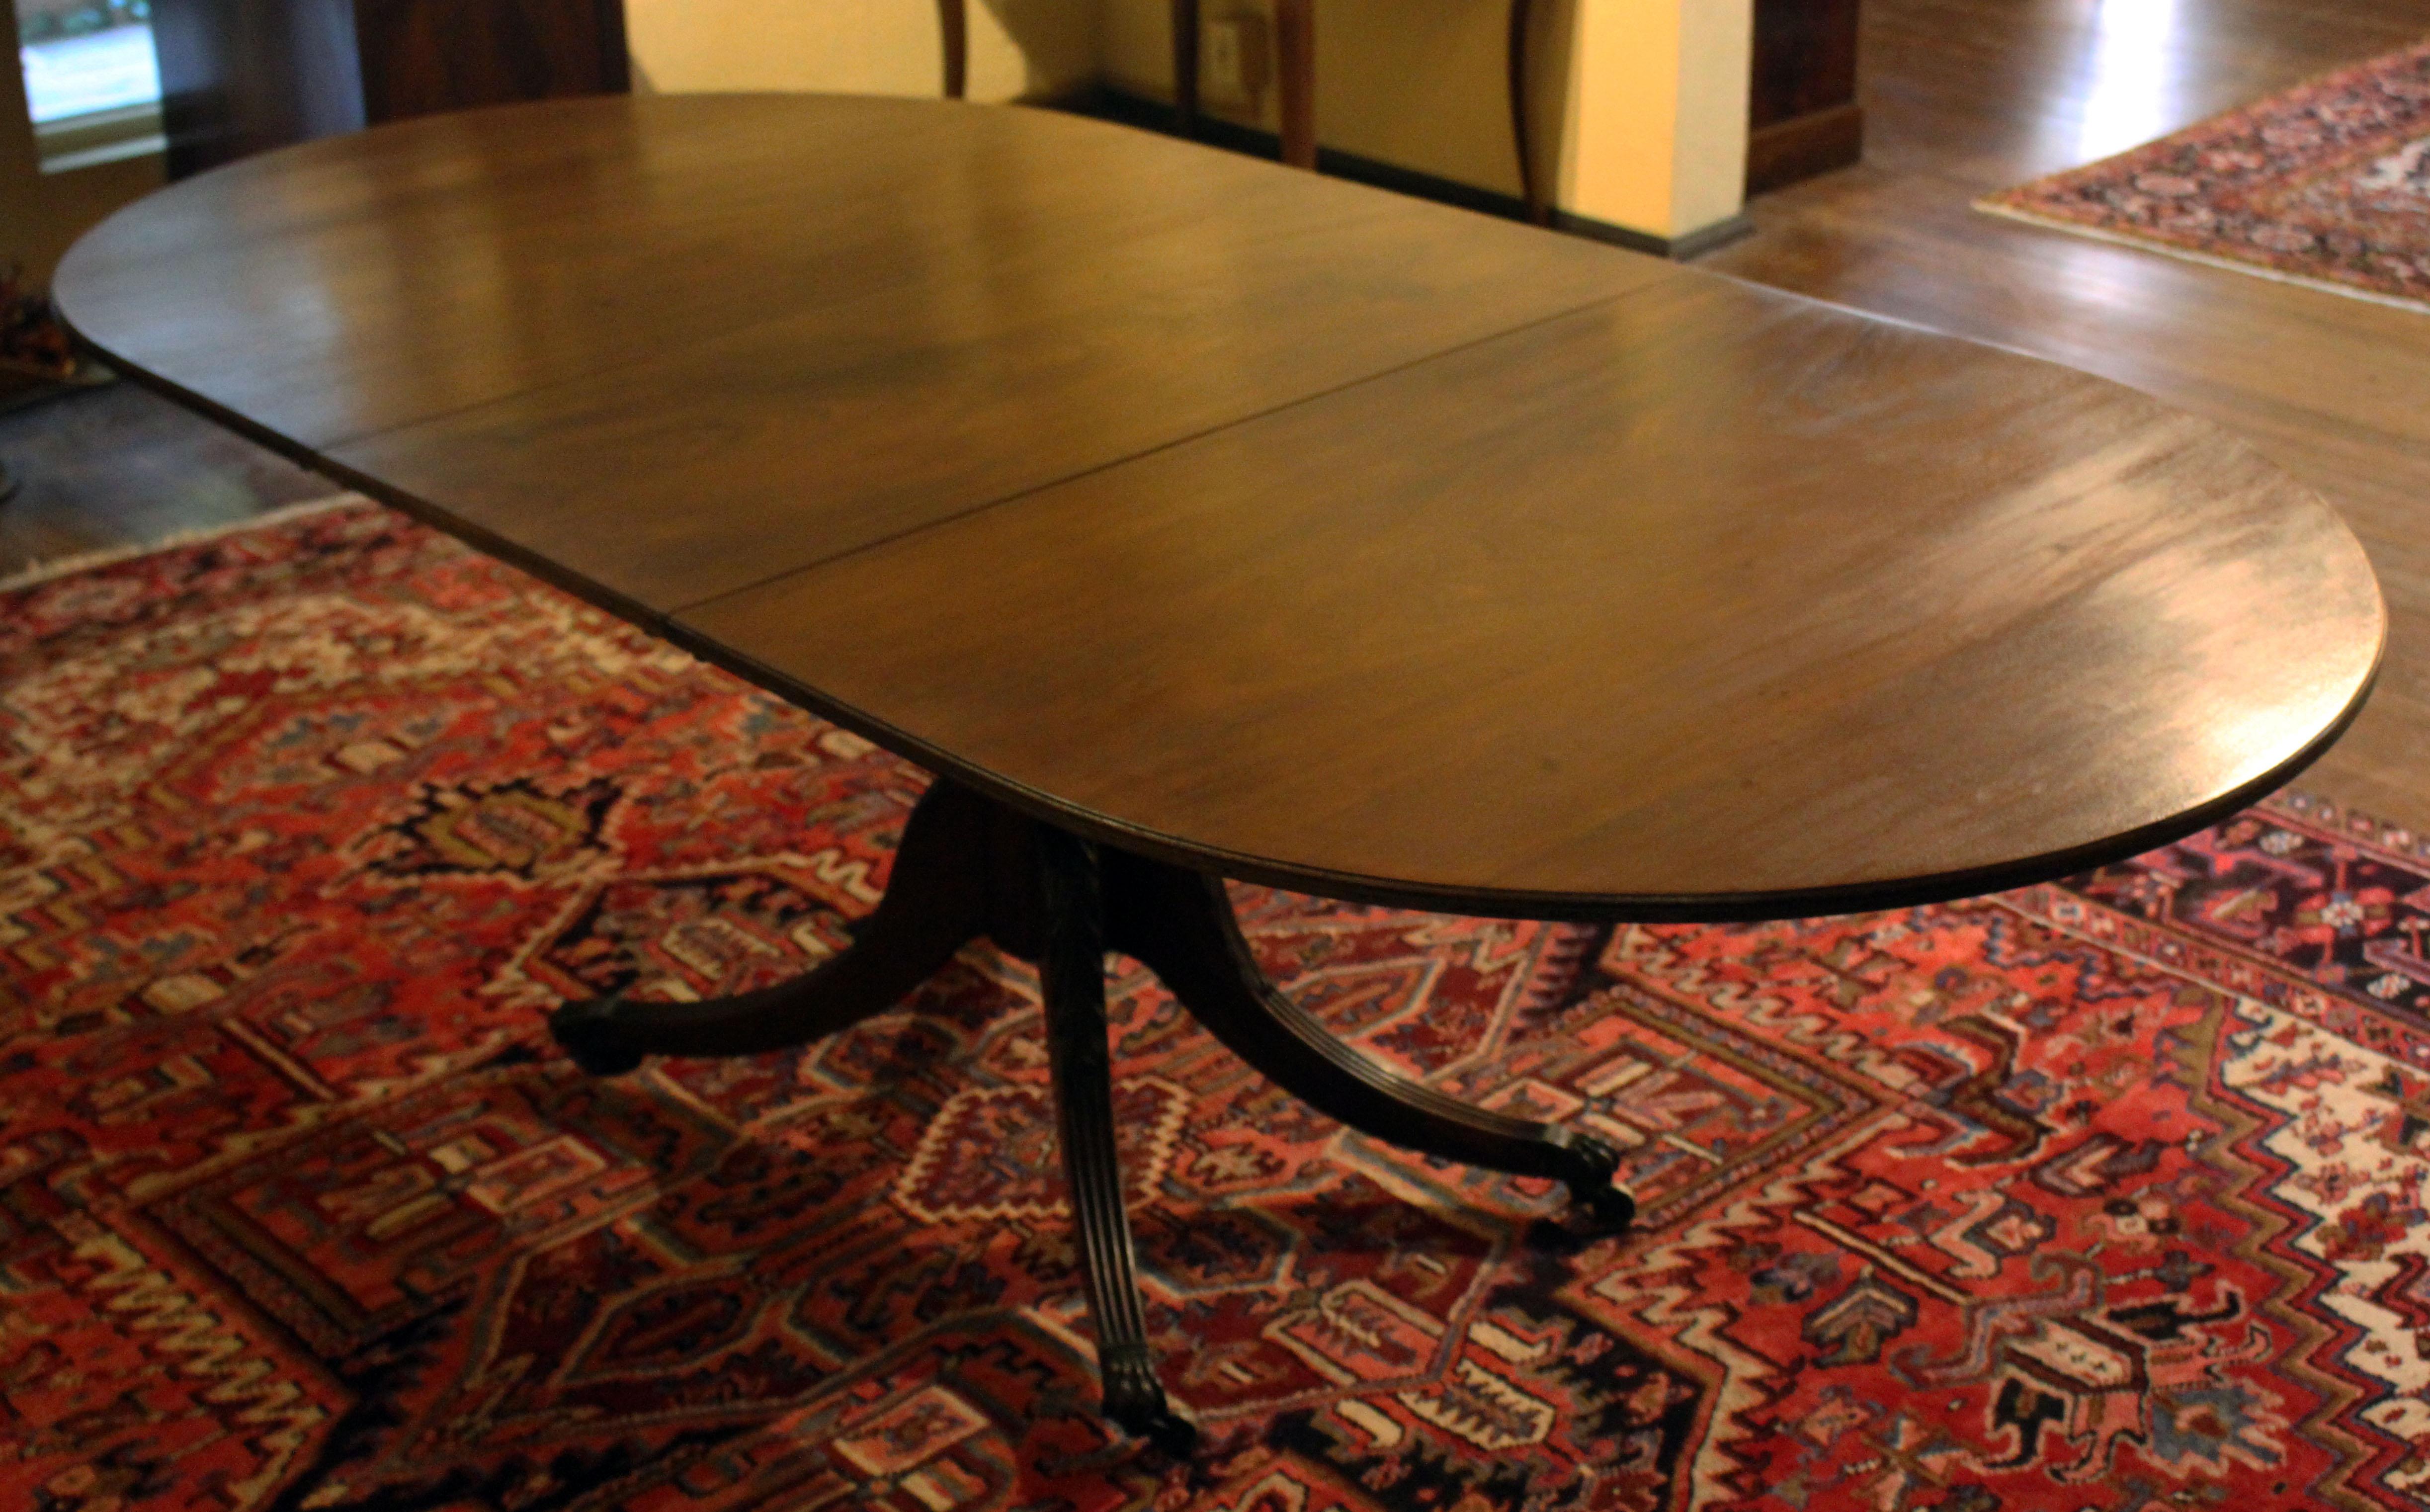 Early 19th century pedestal expanding dining table. English. Mahogany. Likely adapted in the early 20th century from a larger pedestal table to accomodate smaller townhouse living. Good Georgian well-turned pedestal with 4 splay legs with acanthus